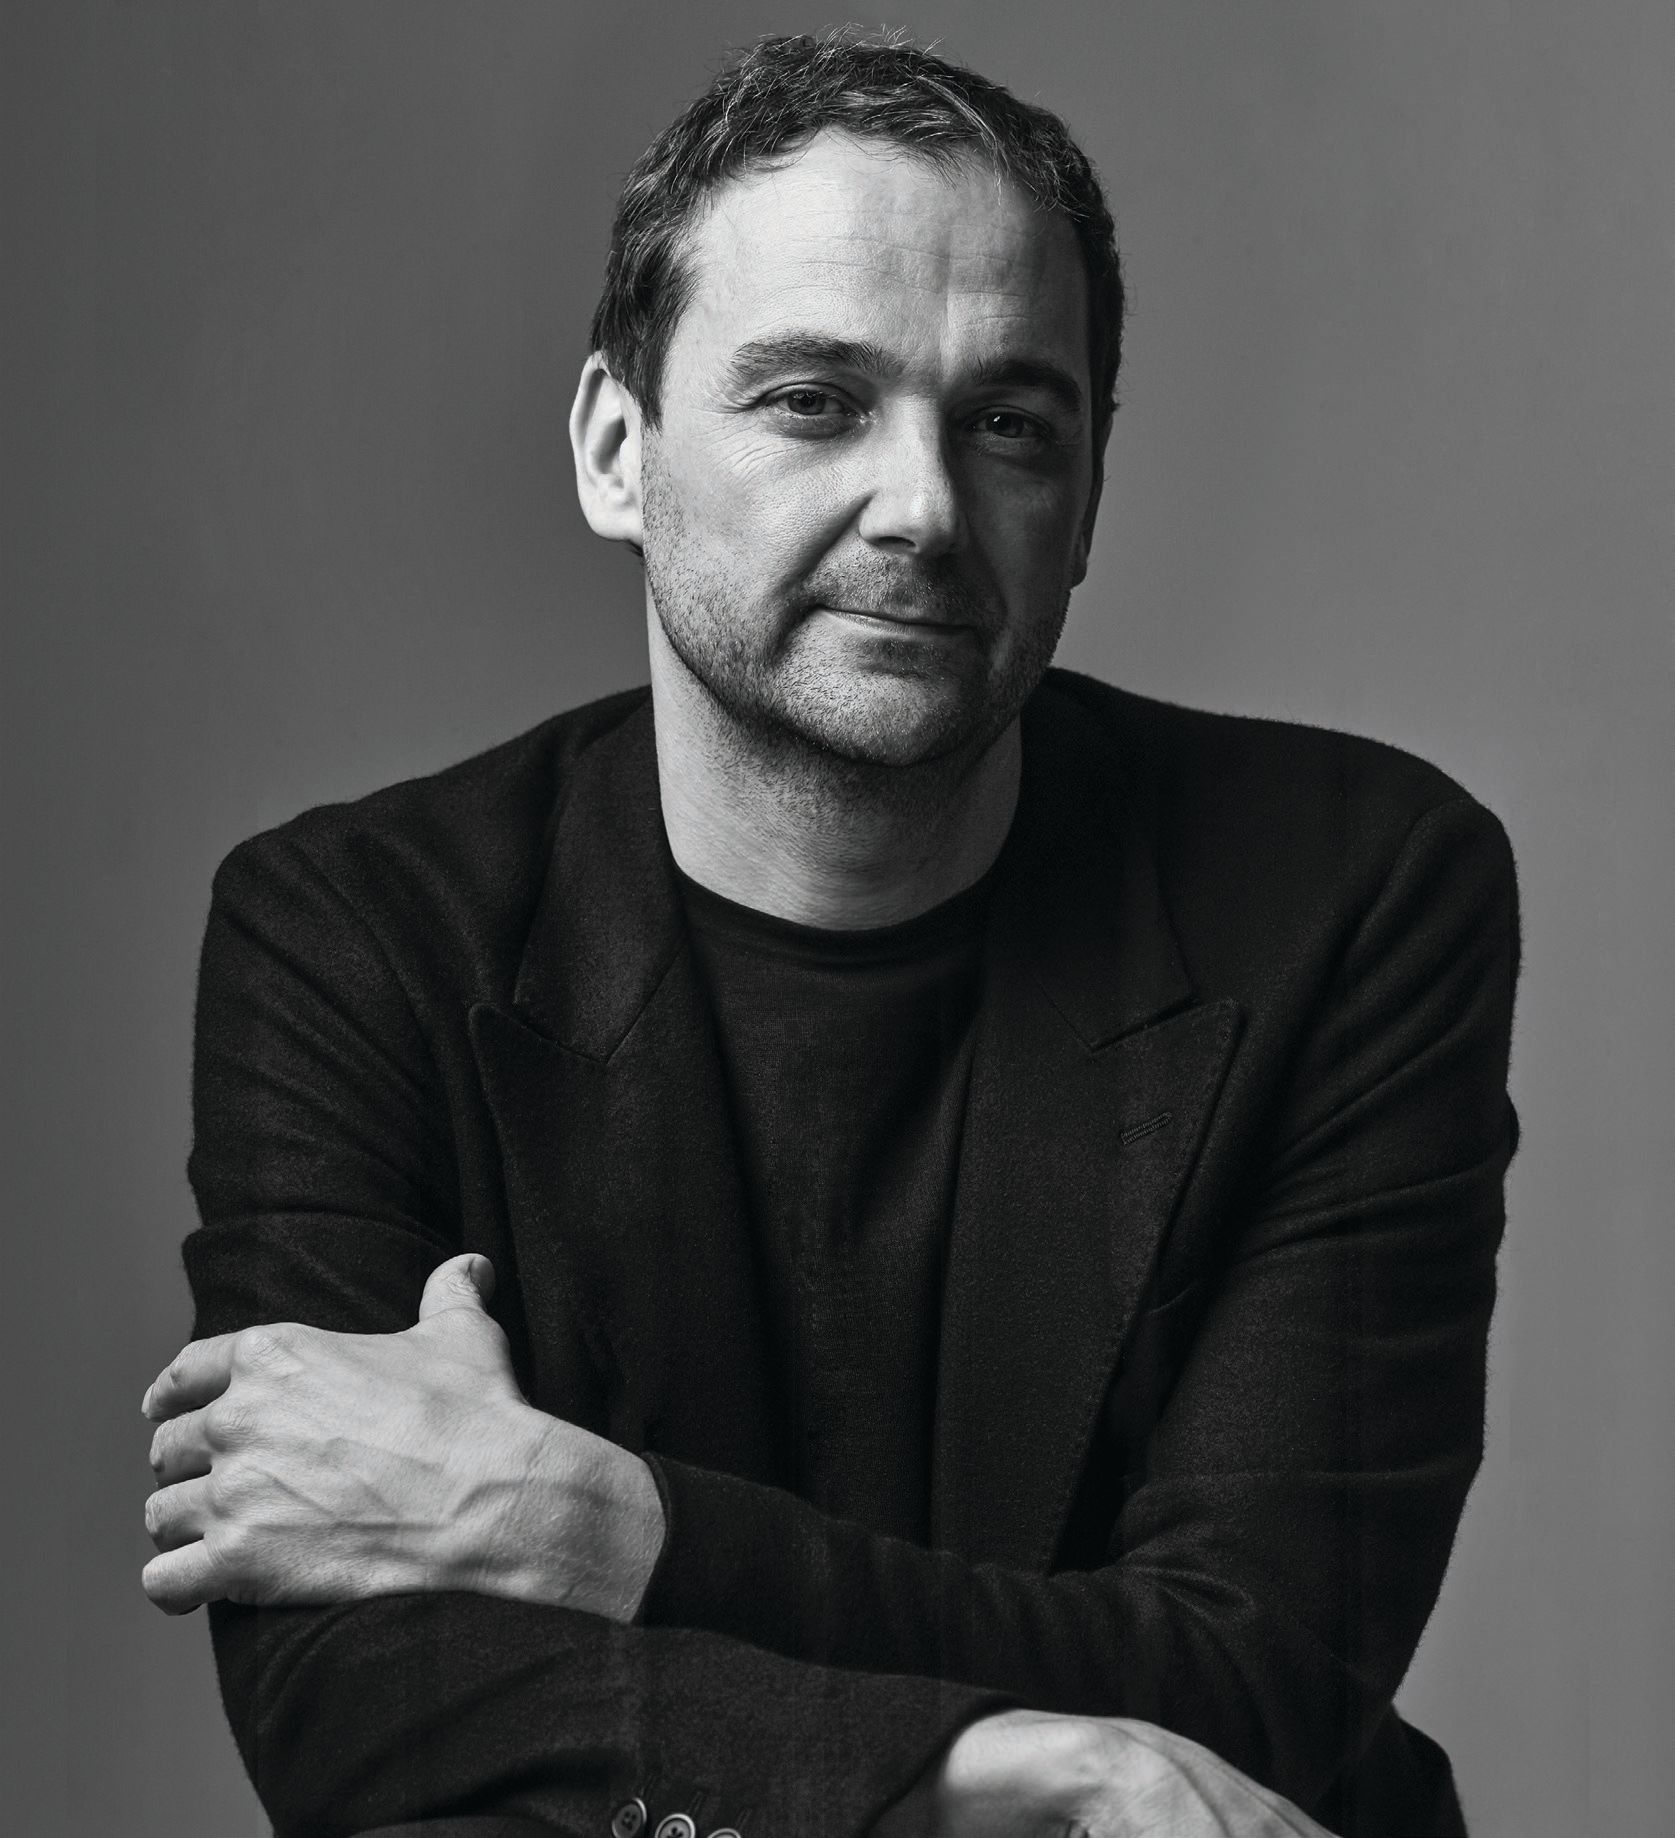 Chef and restaurateur Daniel Humm PHOTO BY CRAIG MCDEAN/COURTESY OF SUBJECT